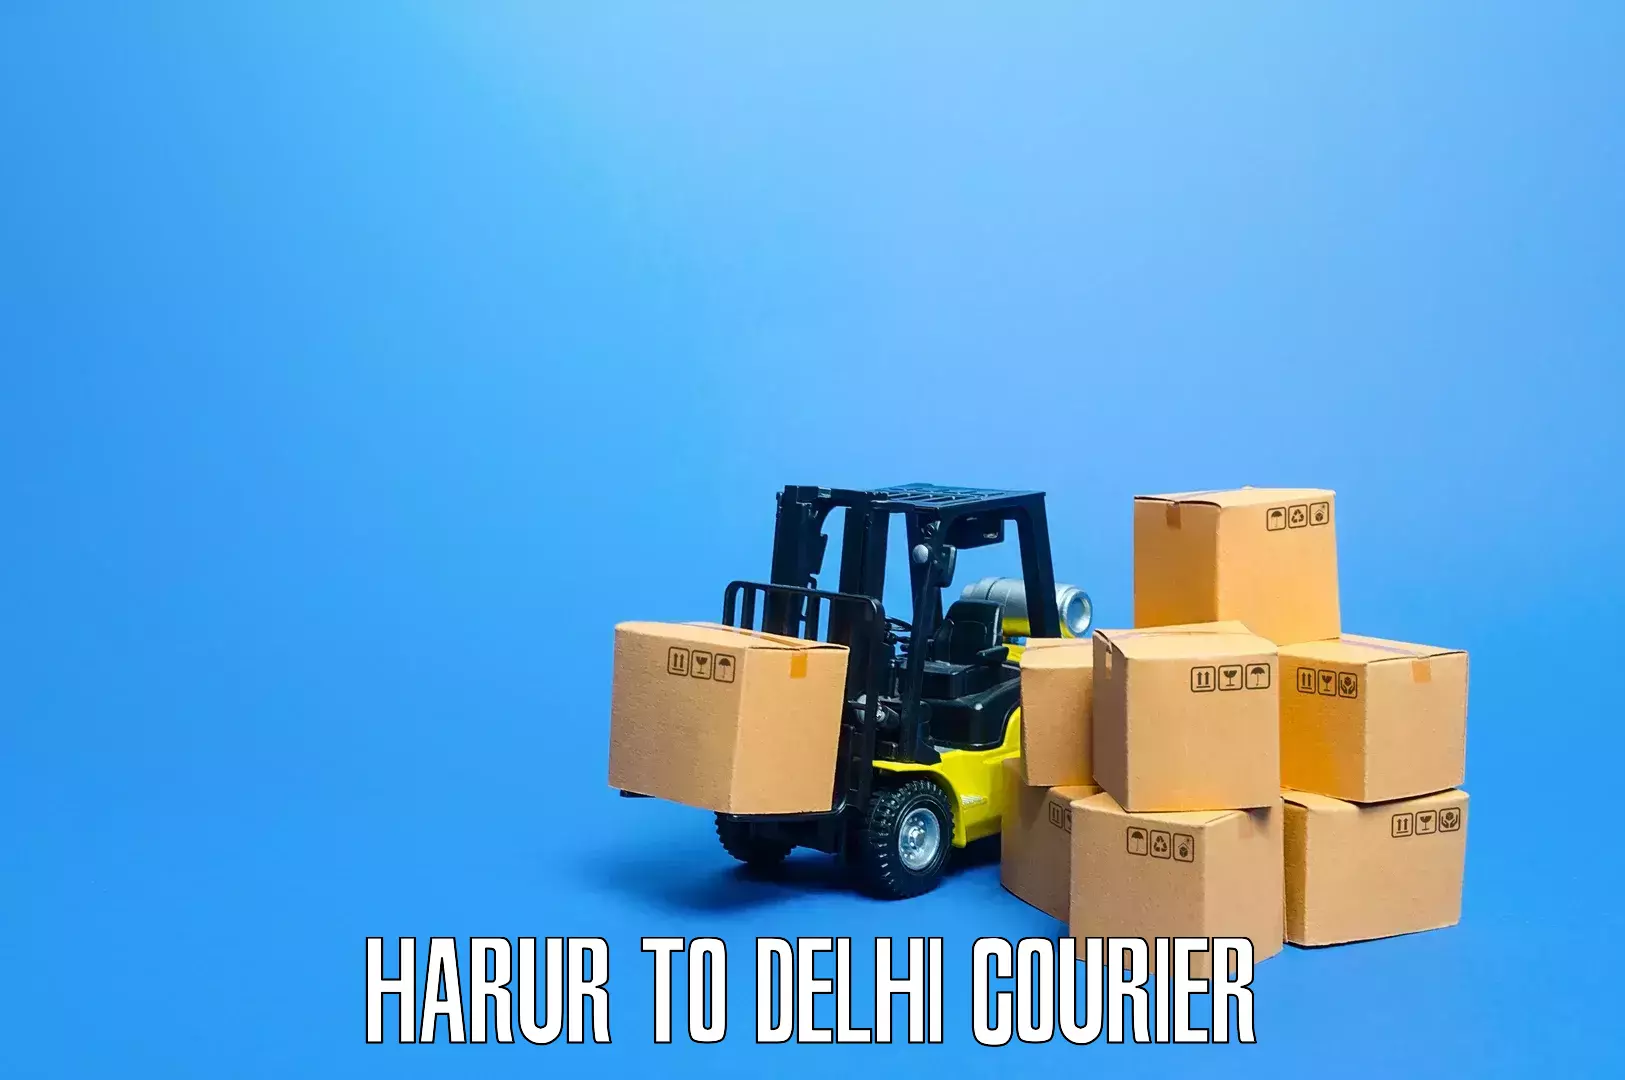 Household goods delivery Harur to Lodhi Road